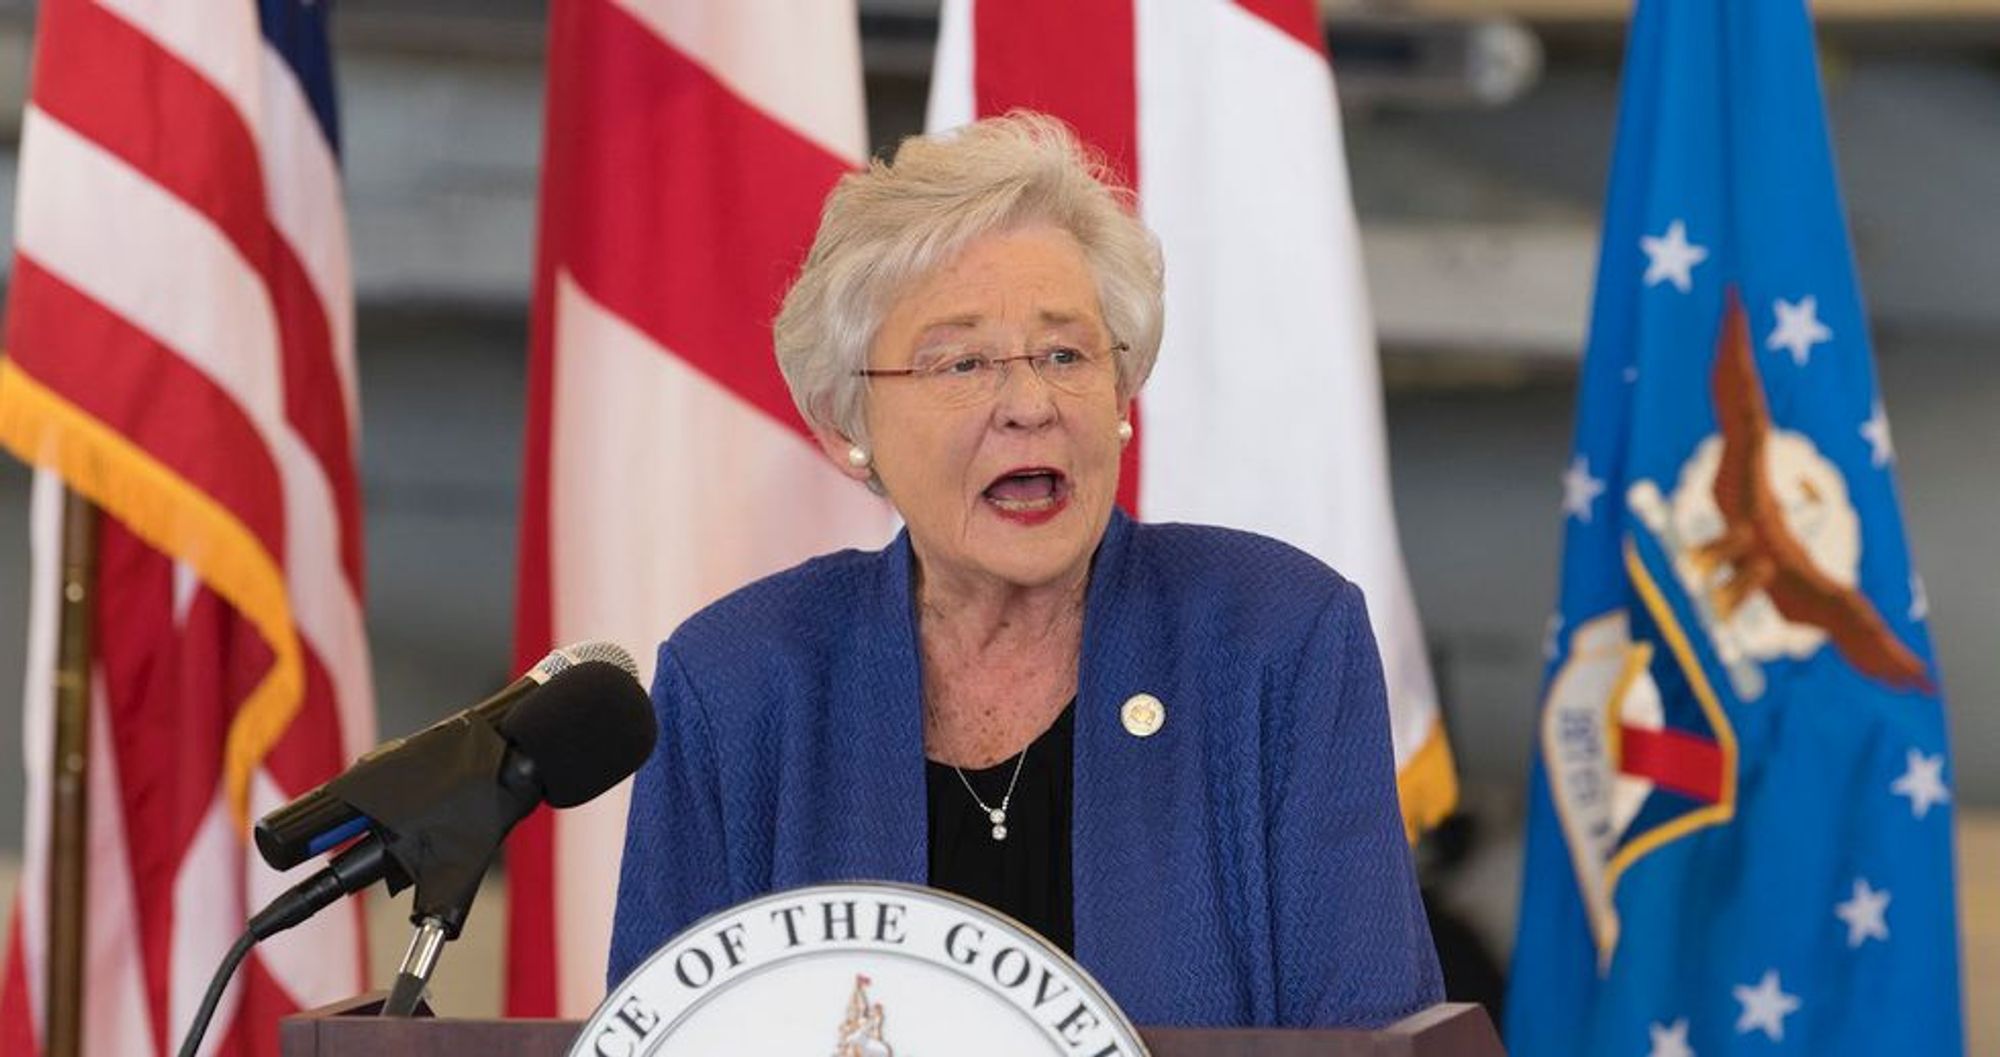 Alabama Gov Kay Ivey Admits She Wore Blackface In A Racist Skit After Recording Surfaces 